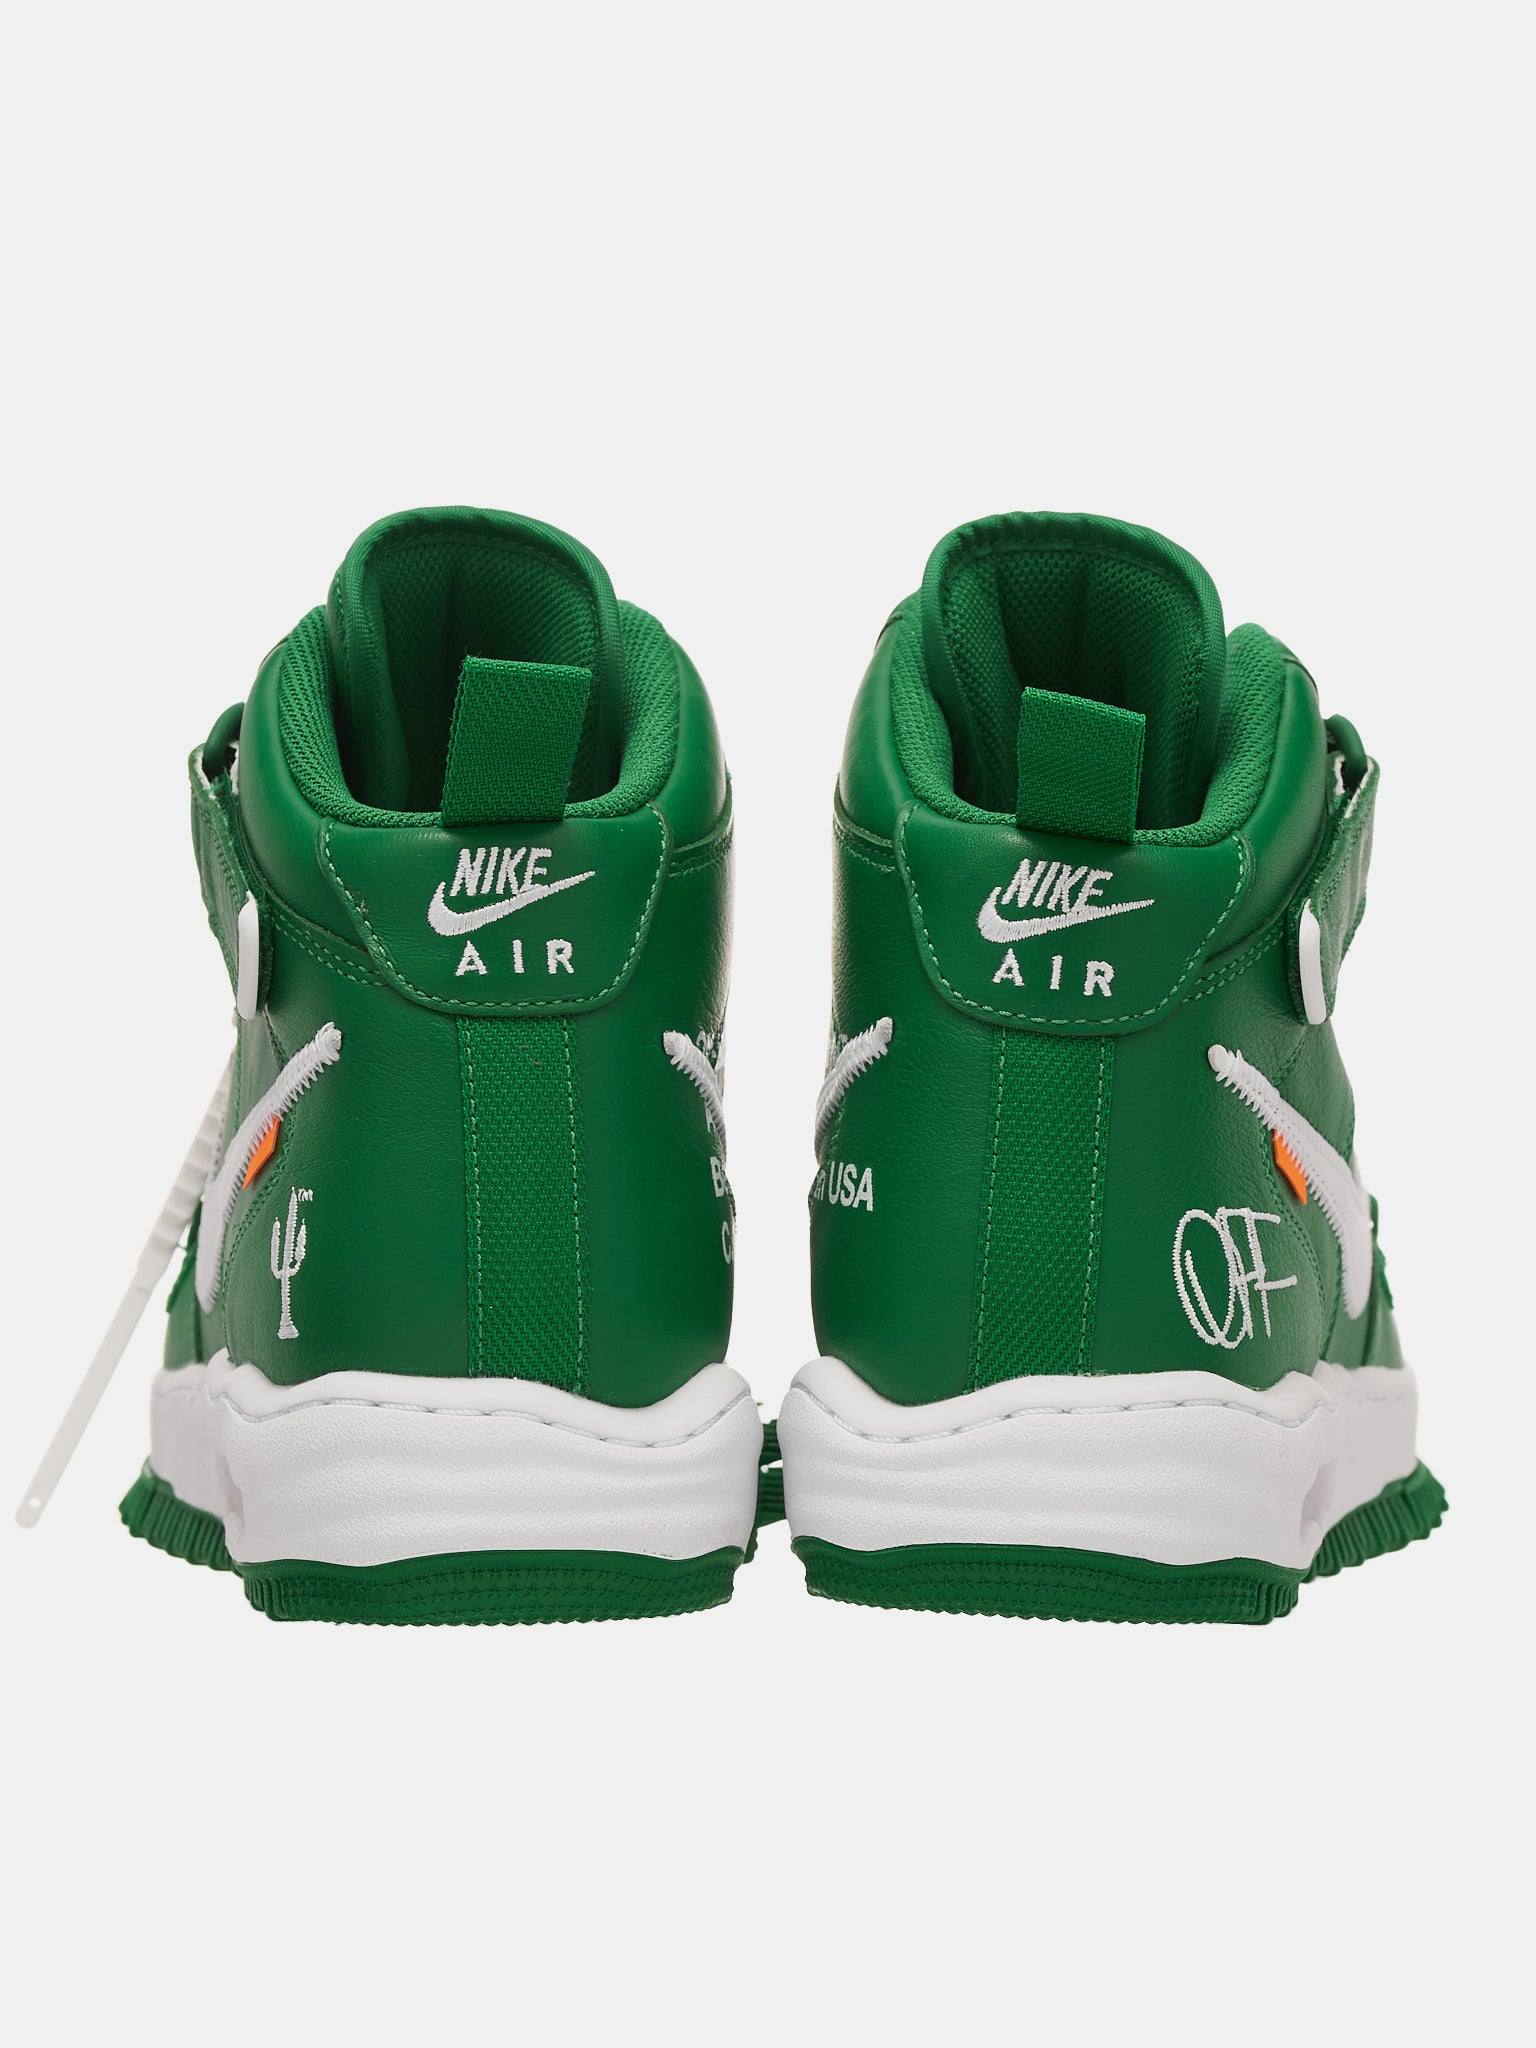 Off-White™ Air Force 1 Mid (DR0500-300-PINE-GREEN-WHITE)